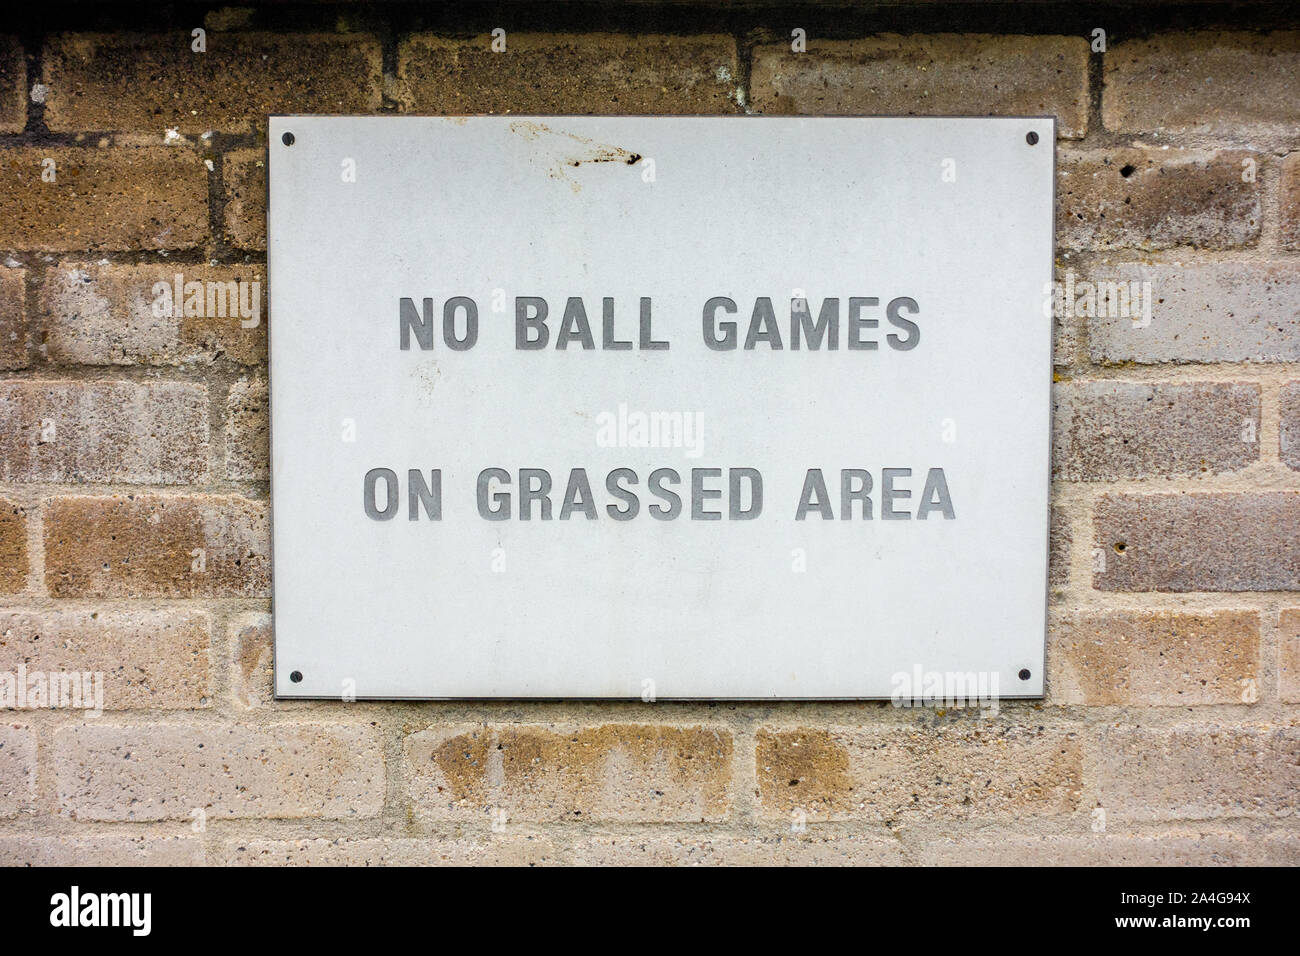 A sign on a brick wall instructing people not to play ball games on an adjacent grassed area, Stock Photo